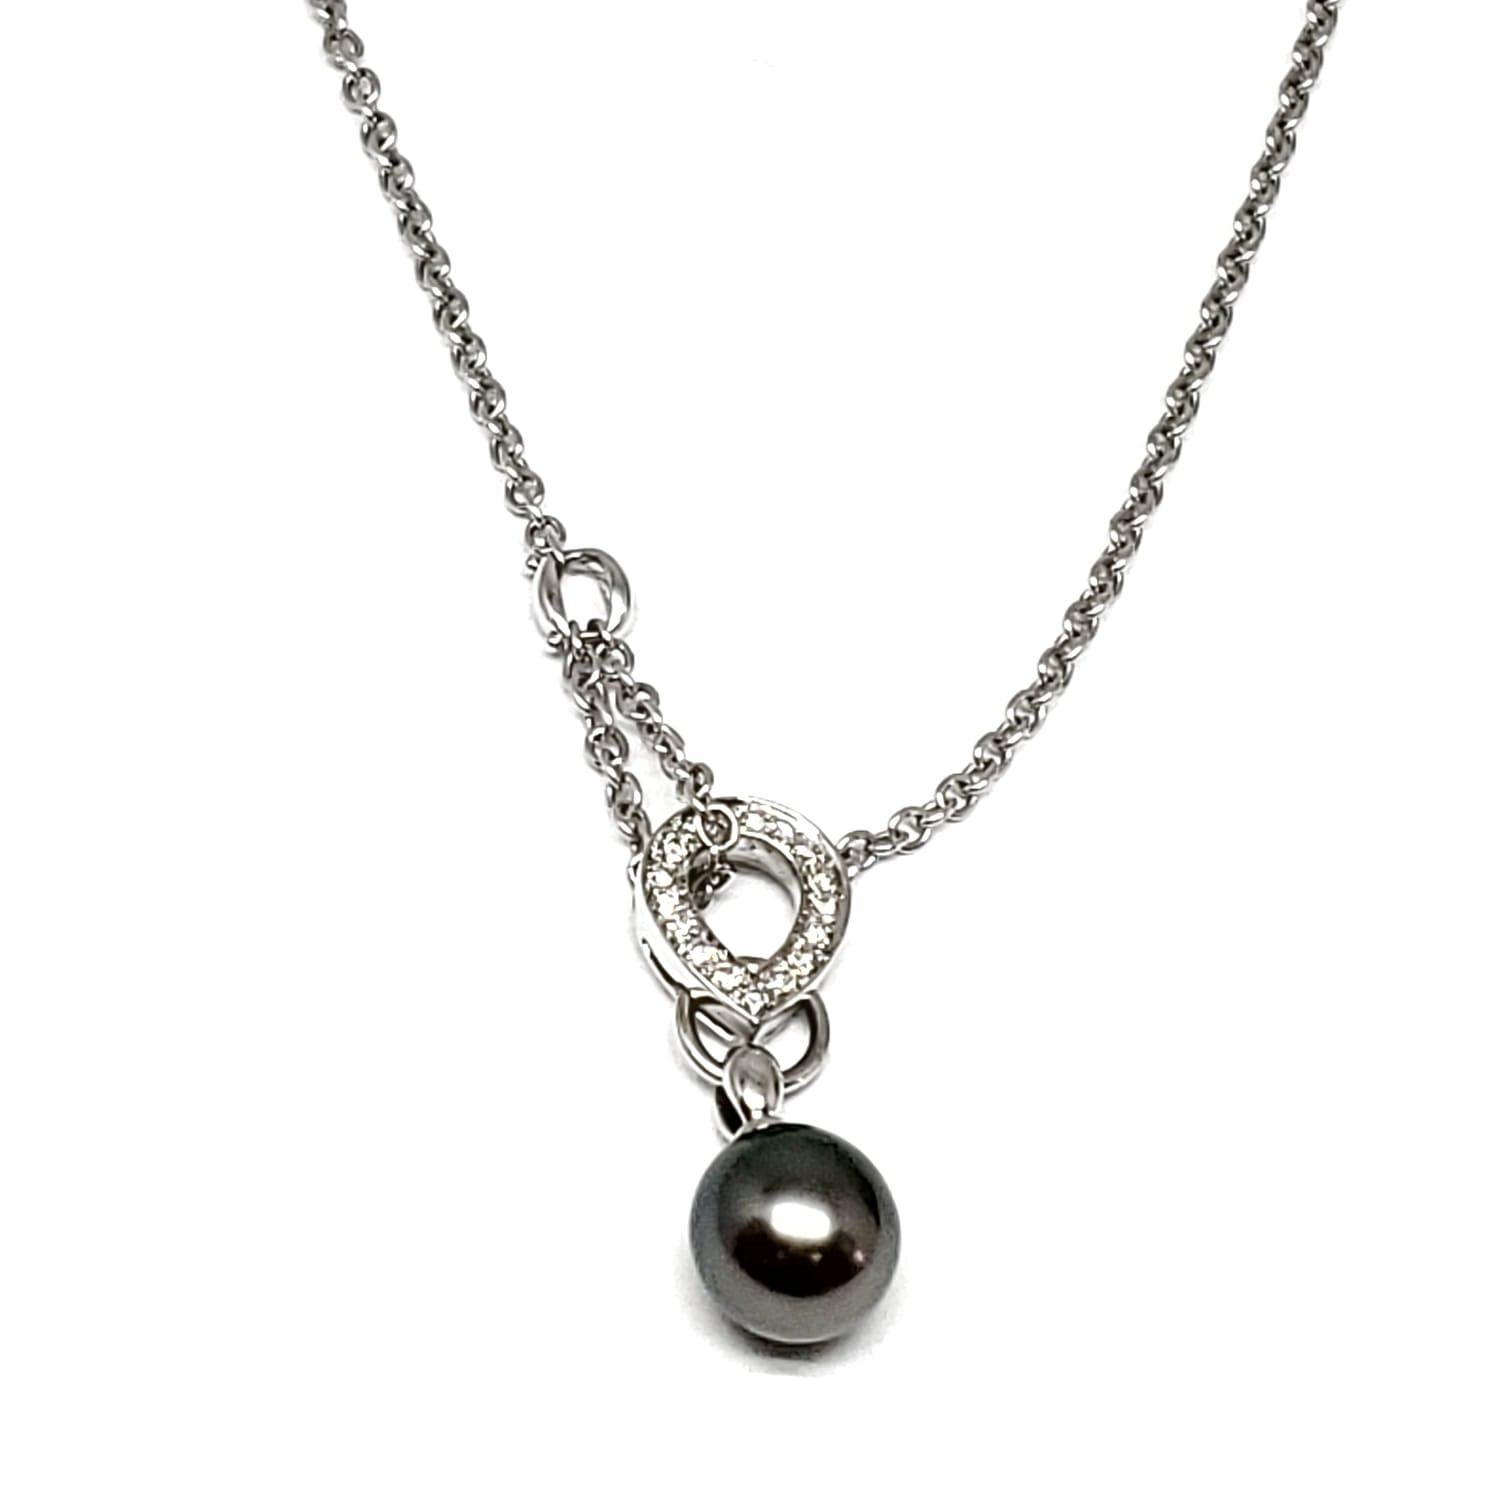 Andreoli Tahitian Pearl Drop Diamond Pendant 18 Karat White Gold Chain Necklace

This Andreoli Pendant features:

- 0.38 carat diamond
- 13.00mm x 11.00mm Tahitian Drop Pearl
- 18 Karat White Gold
- Made in Italy